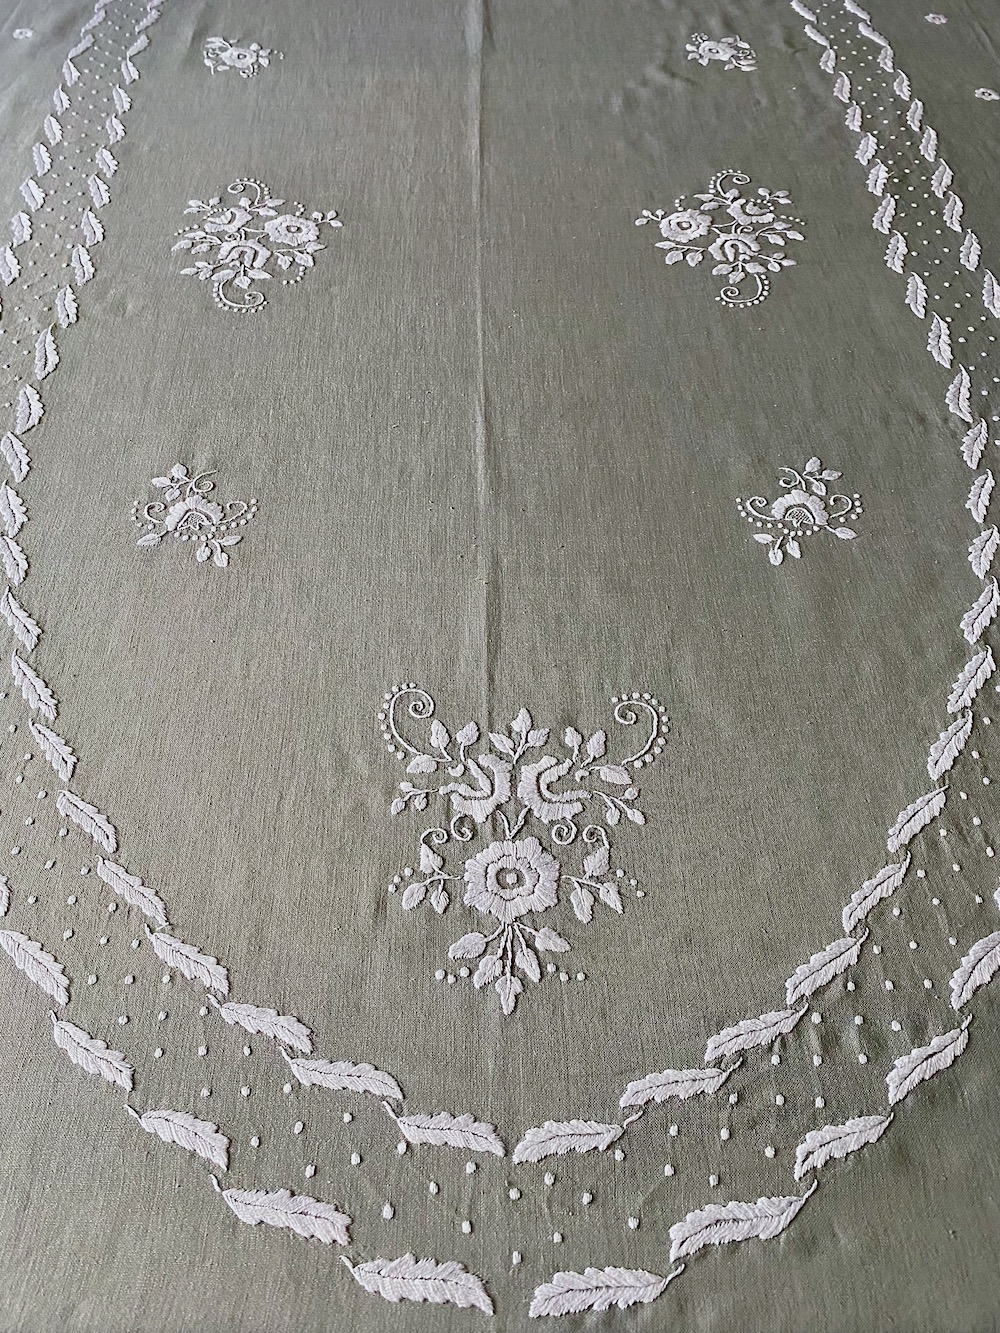 Vintage Embroidered Tablecloth and Napkins Set